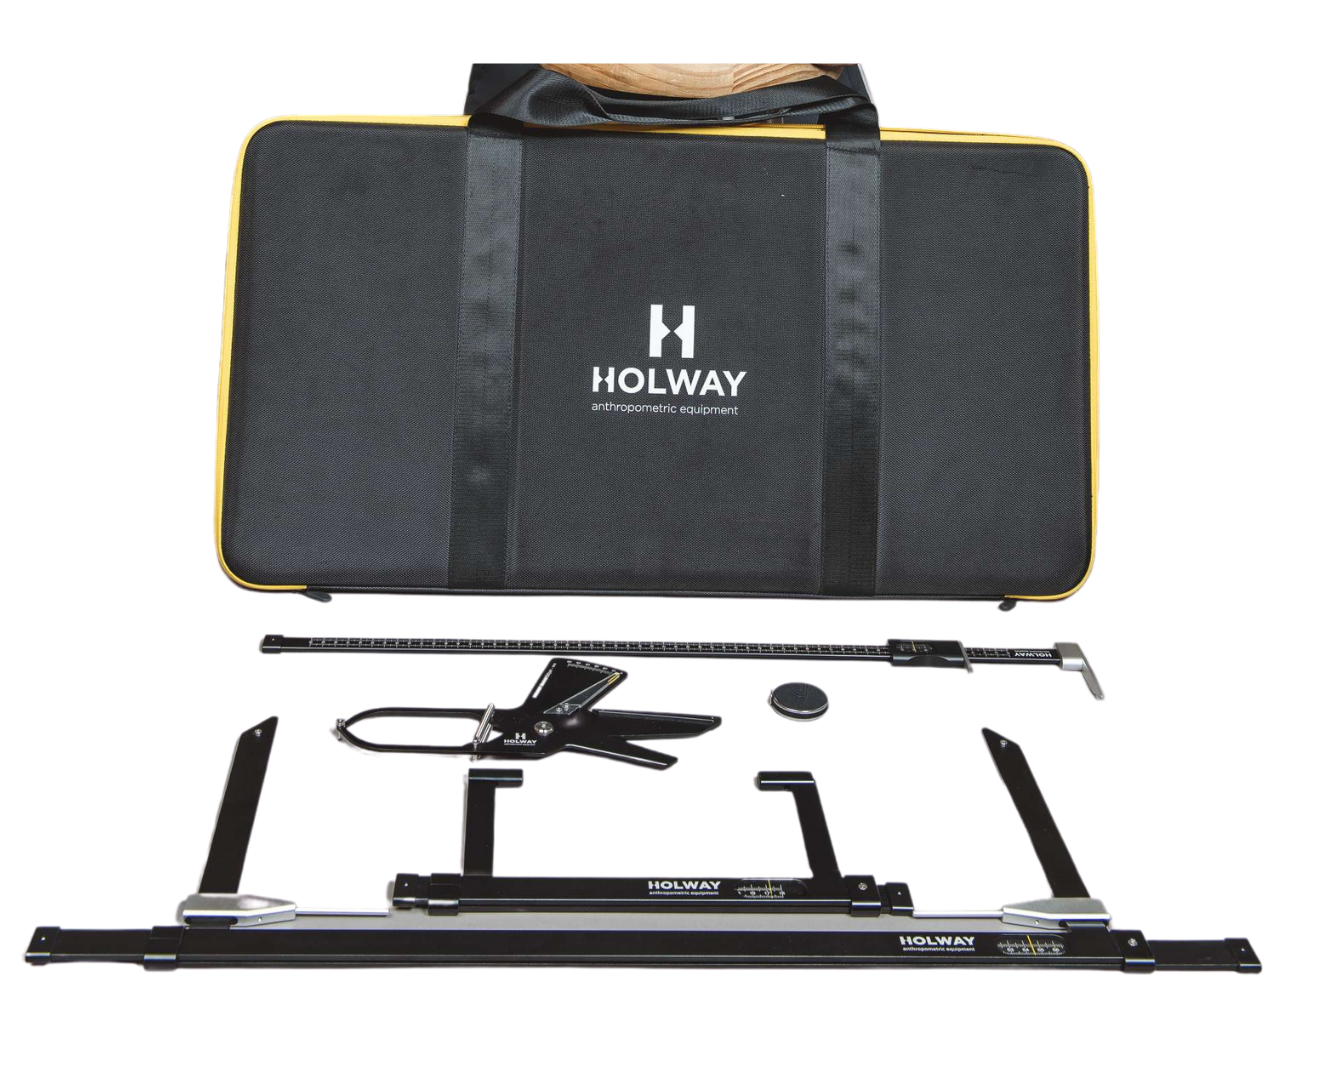 Holway Complete Anthropometry Kit